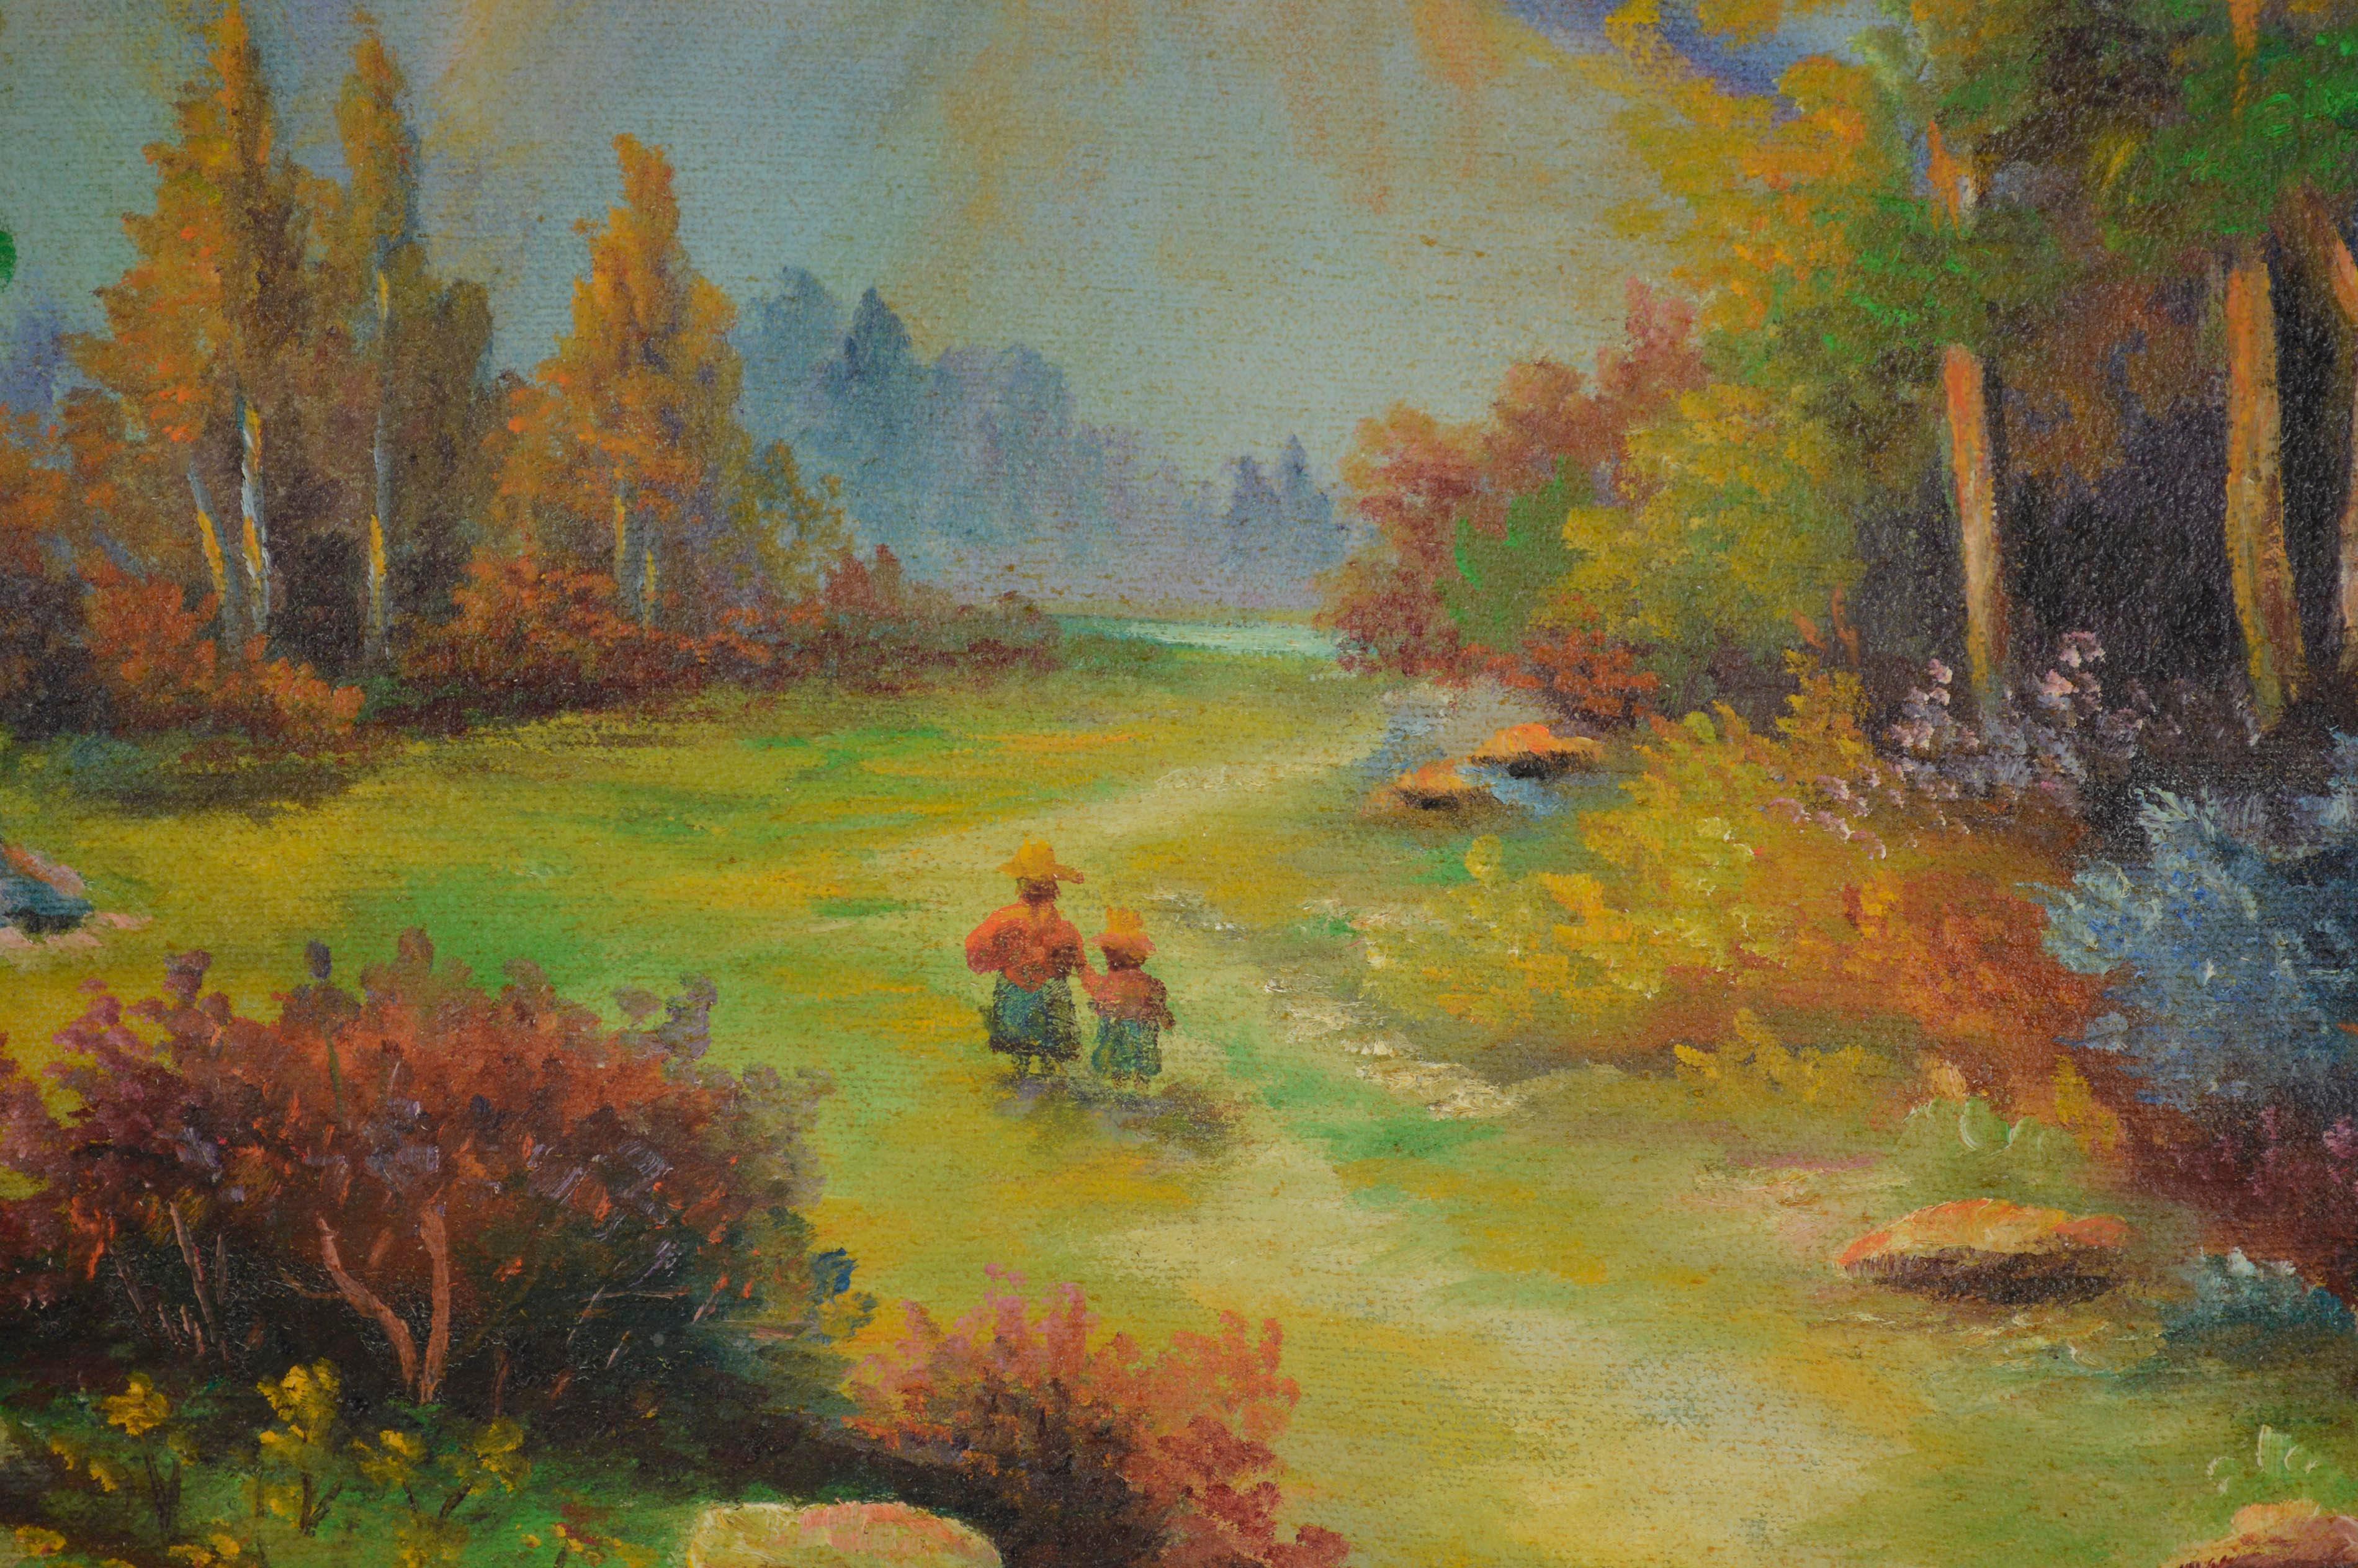 Vibrant mid century California landscape of the beautiful San Ynez Valley Indian Trail with Native American children walking towards the sunset by H. Hansen (American, 20th Century), 1944. The small figures walk through a majestic, sprawling